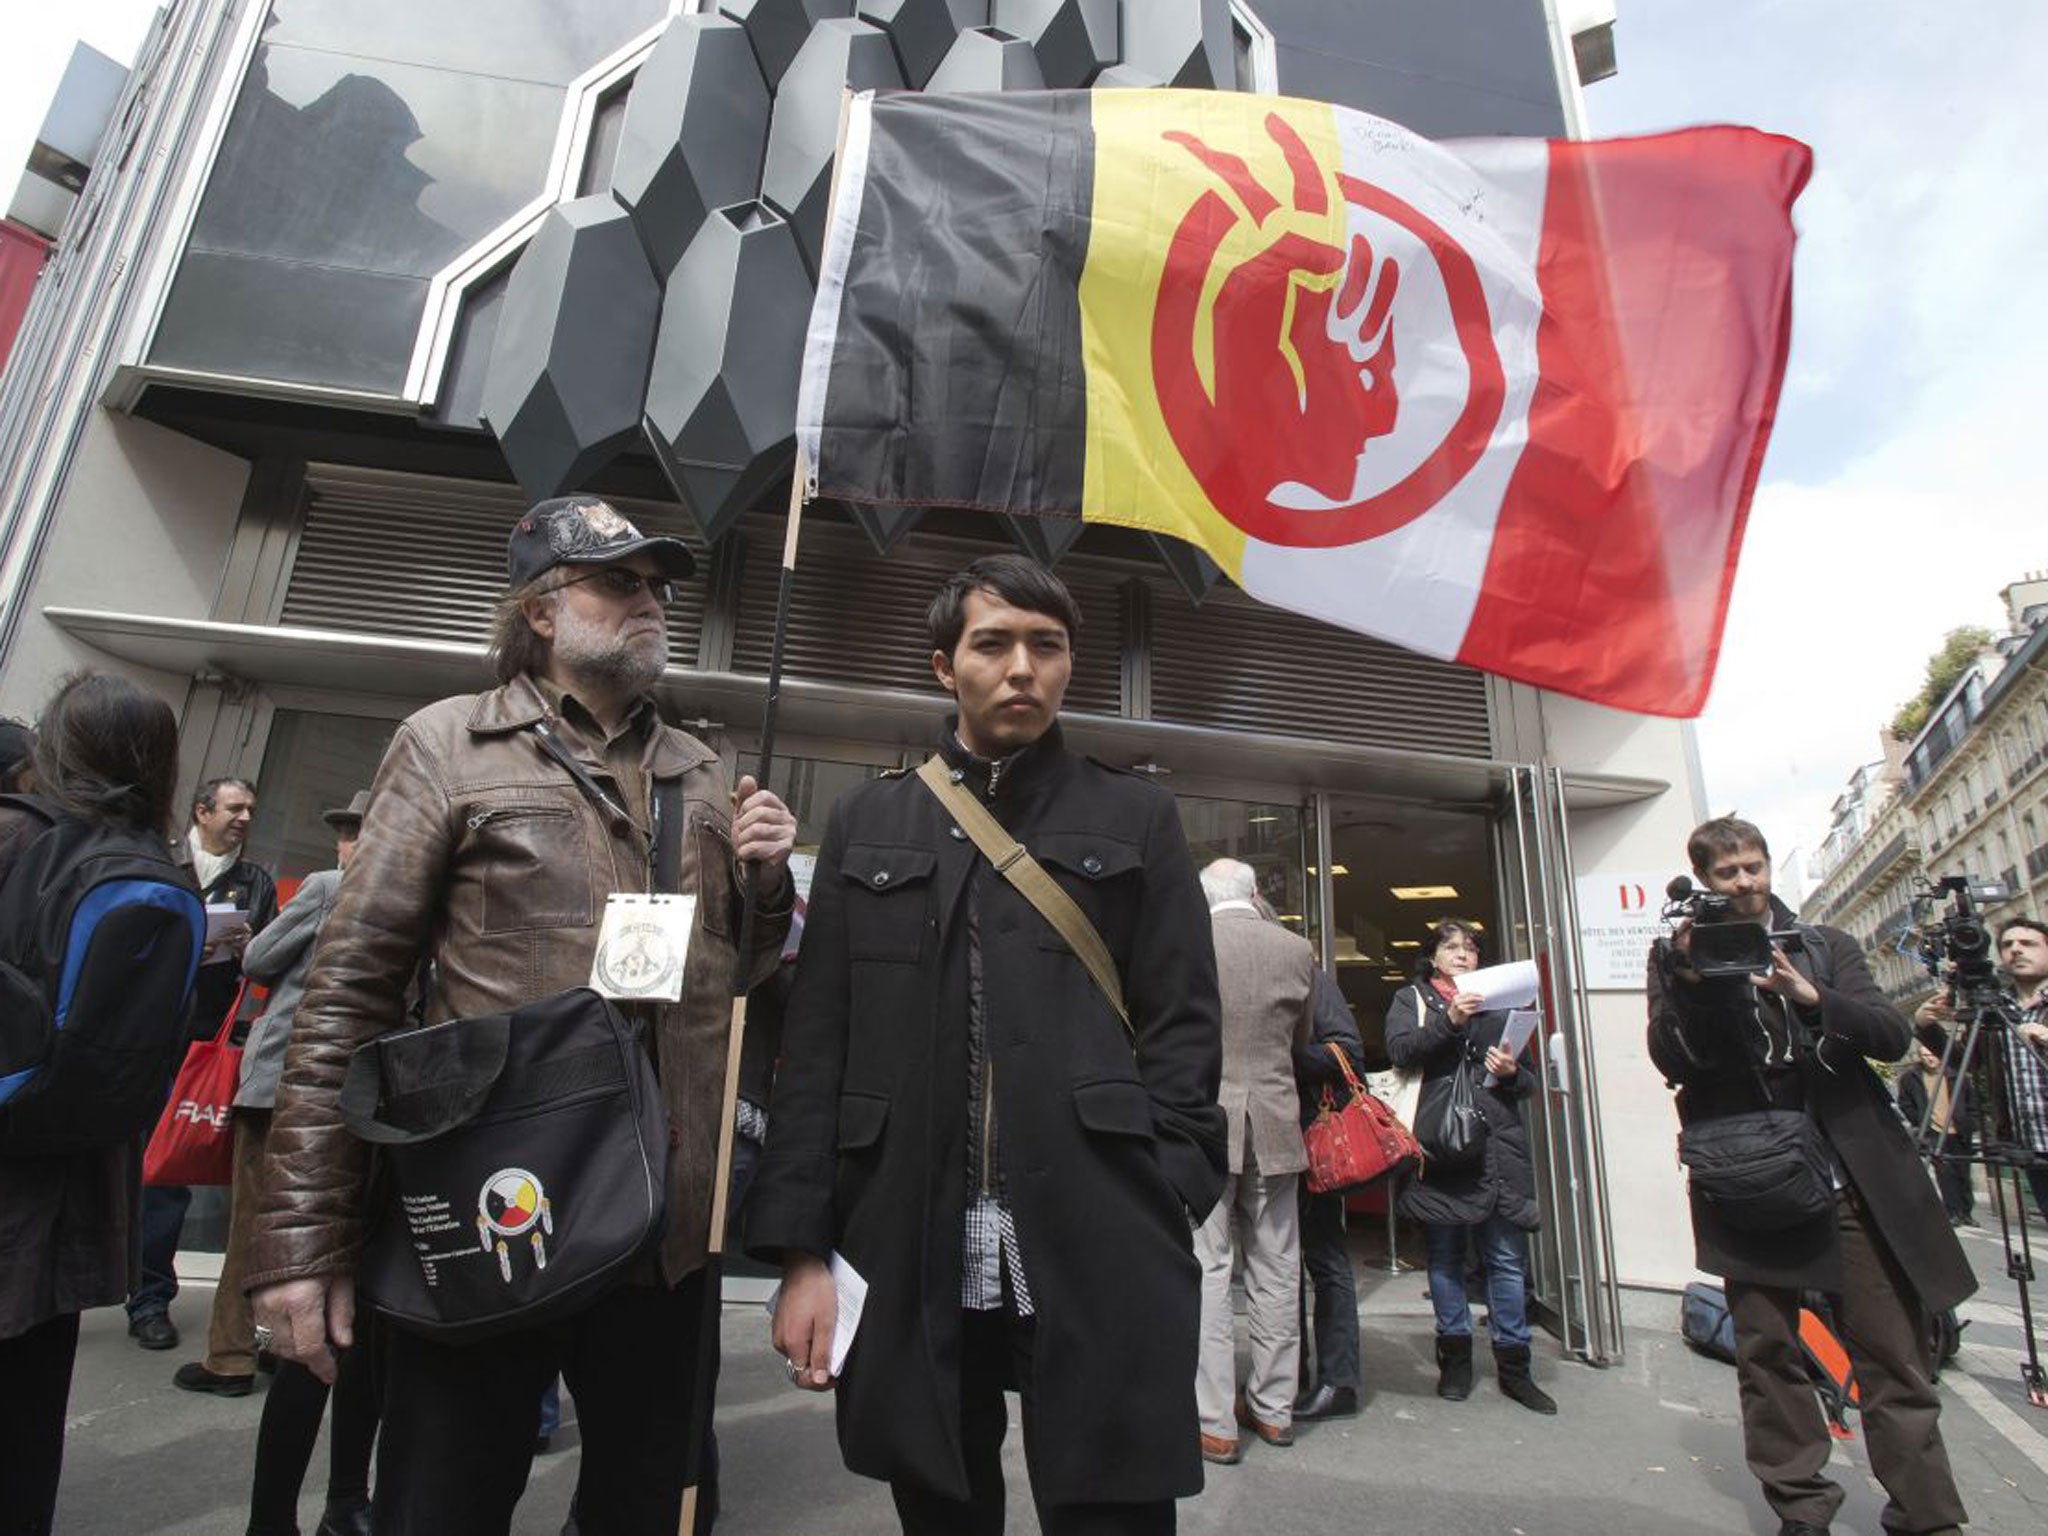 A French supporter of the Indian cause, who refused to give his name, left, holds a flag of the American Indian Movement and an American exchange student, member of the Arizona's Hopi tribe, Bo Lomahquahu, right, stand outside of the Druout's auction hous